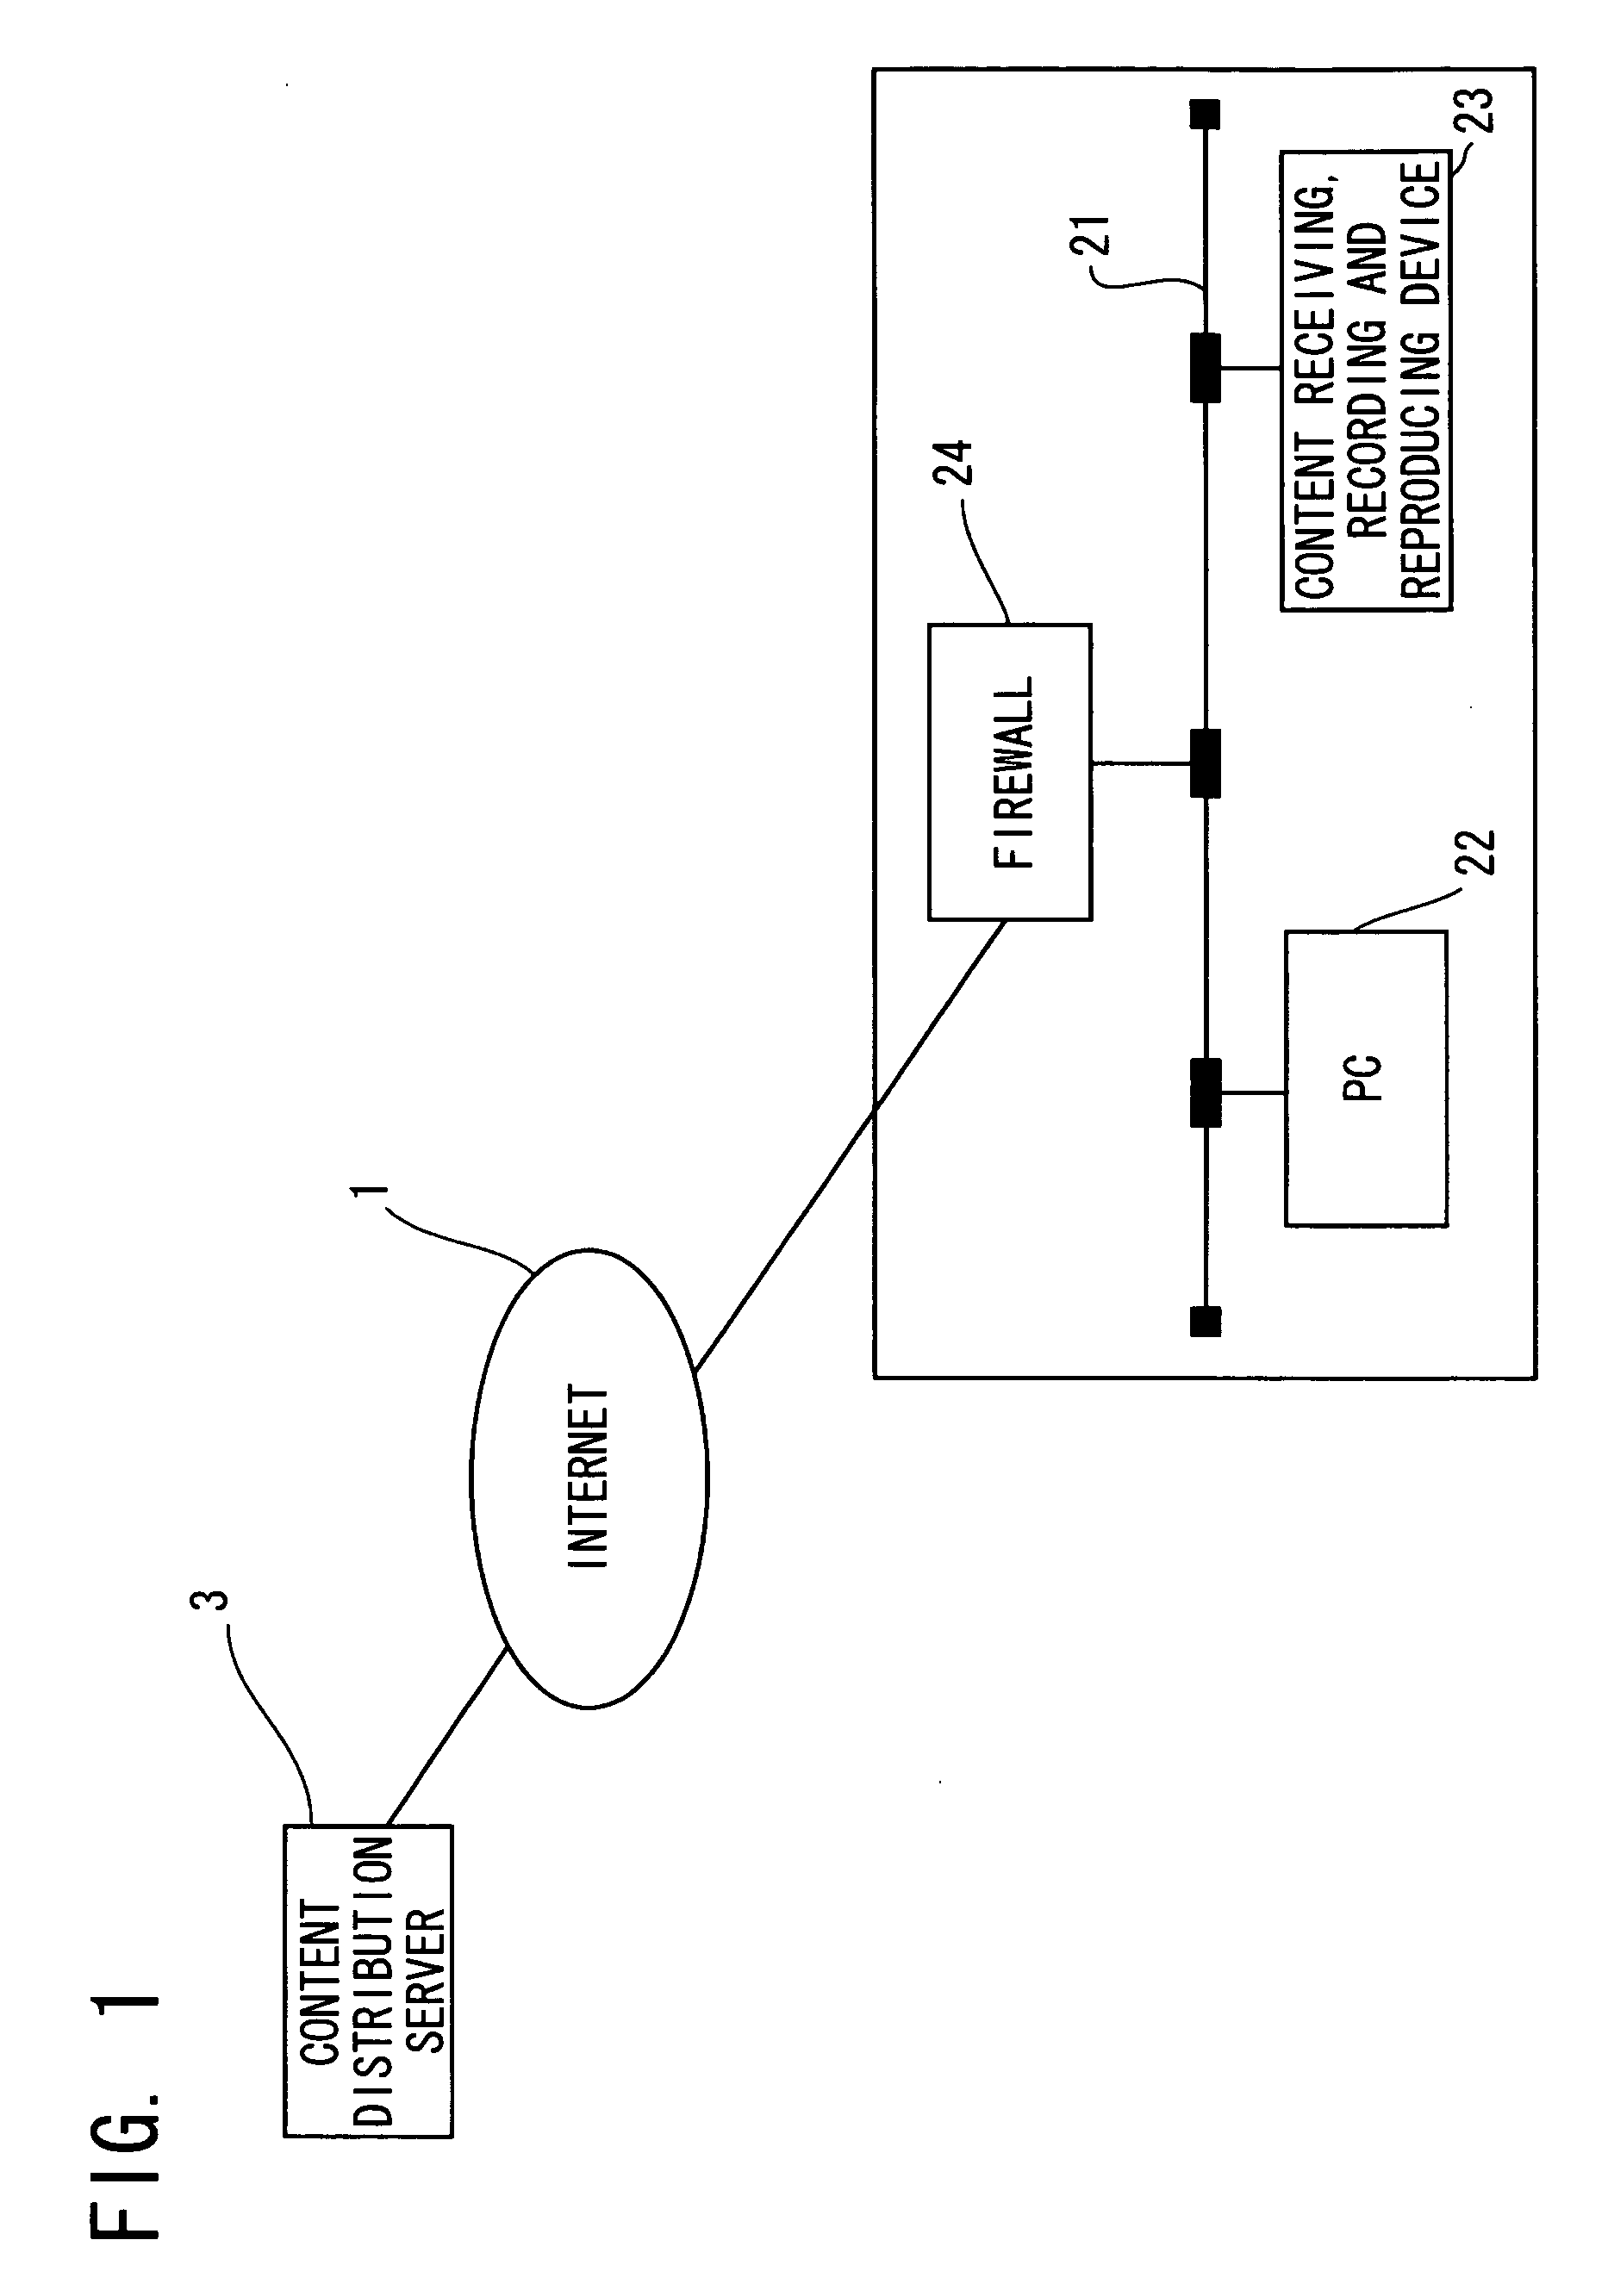 Content receiving, recording and reproducing device and content distribution system